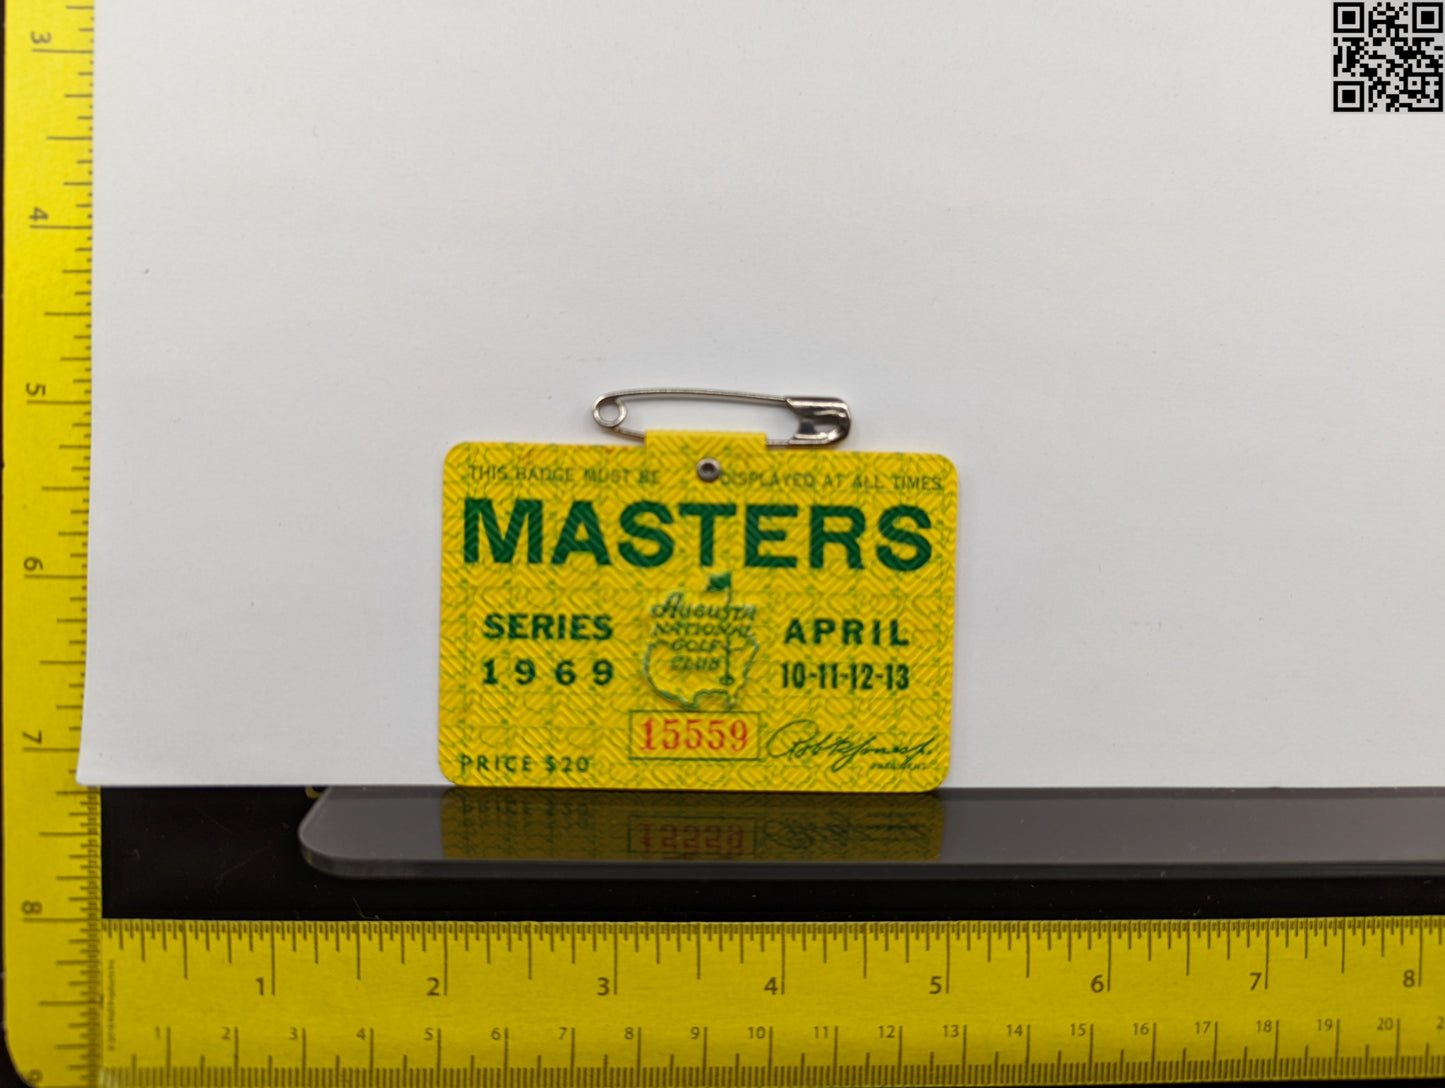 1969 Masters Tournament Series Badge - Augusta National Golf Club - George Archer Win